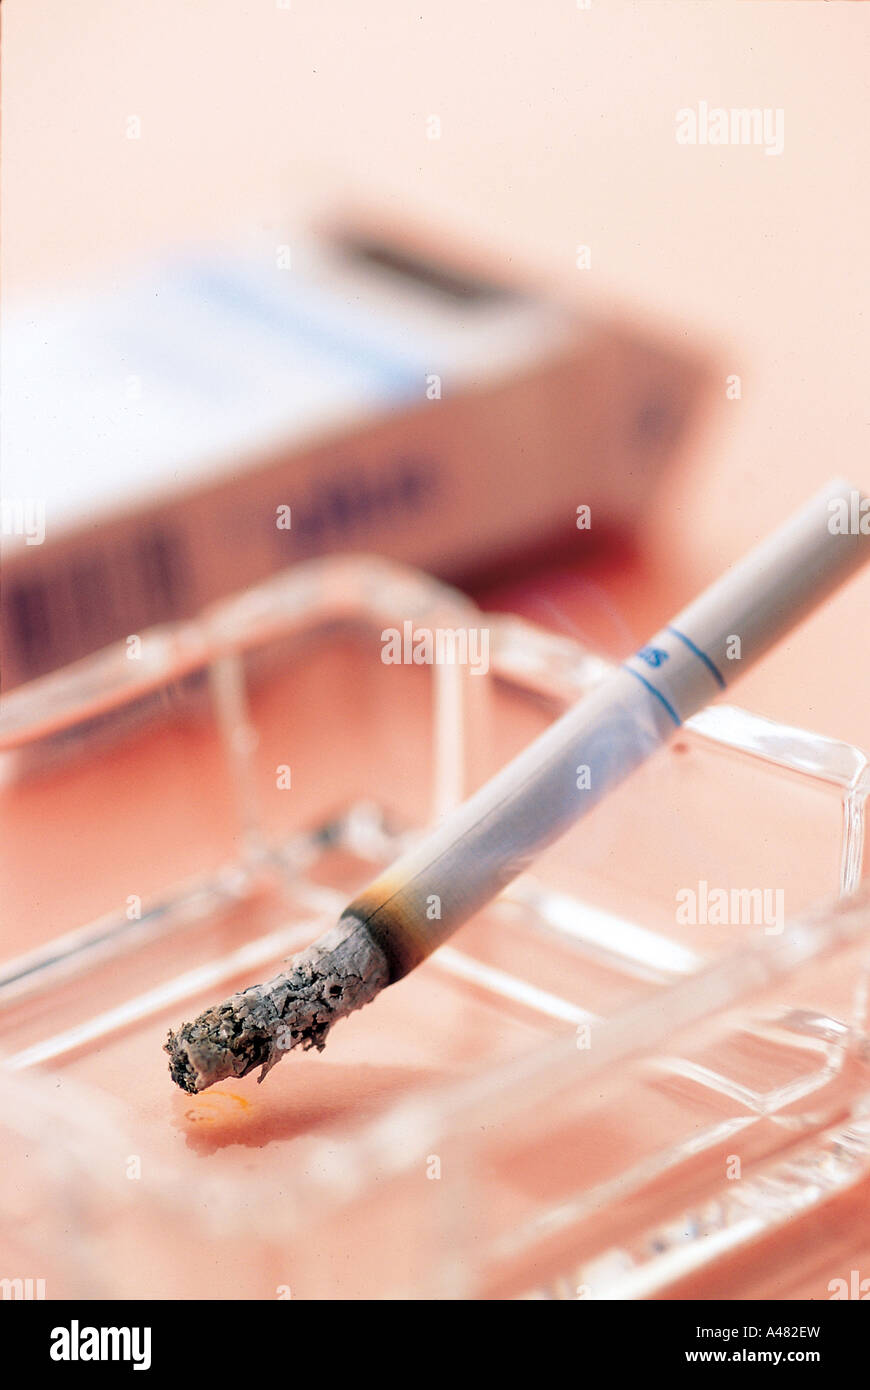 Close-up of a cigarette in an ashtray Stock Photo